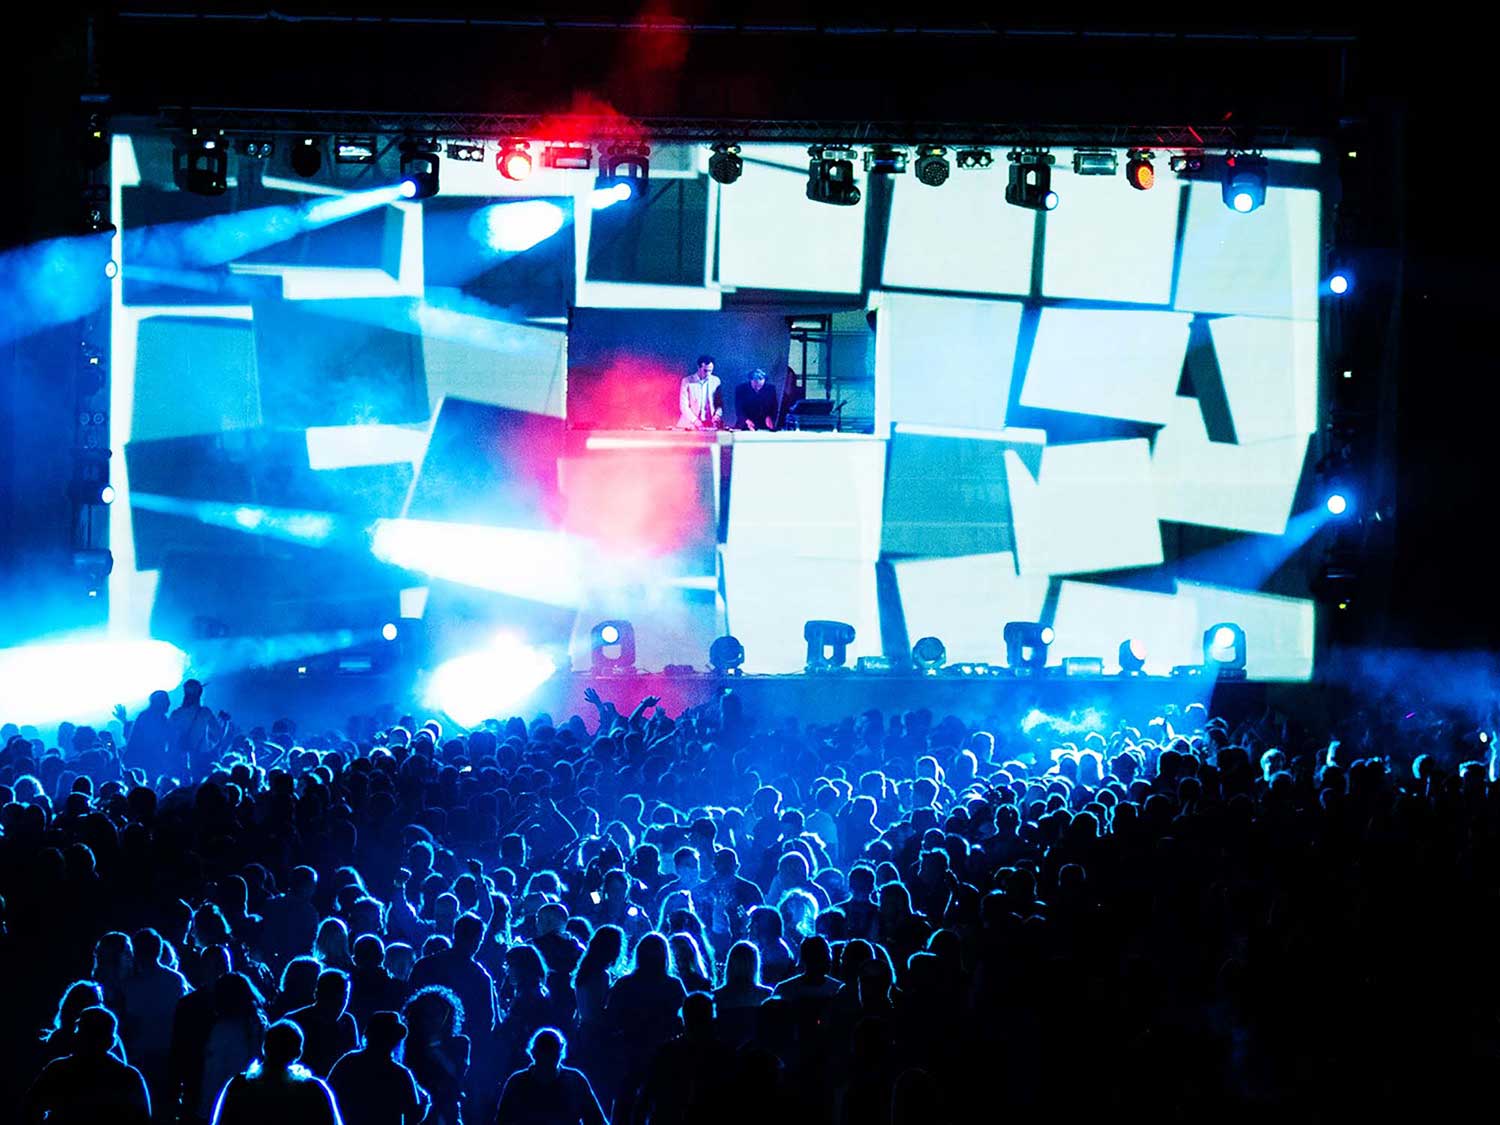 Groove music festival show projections, VJing set live